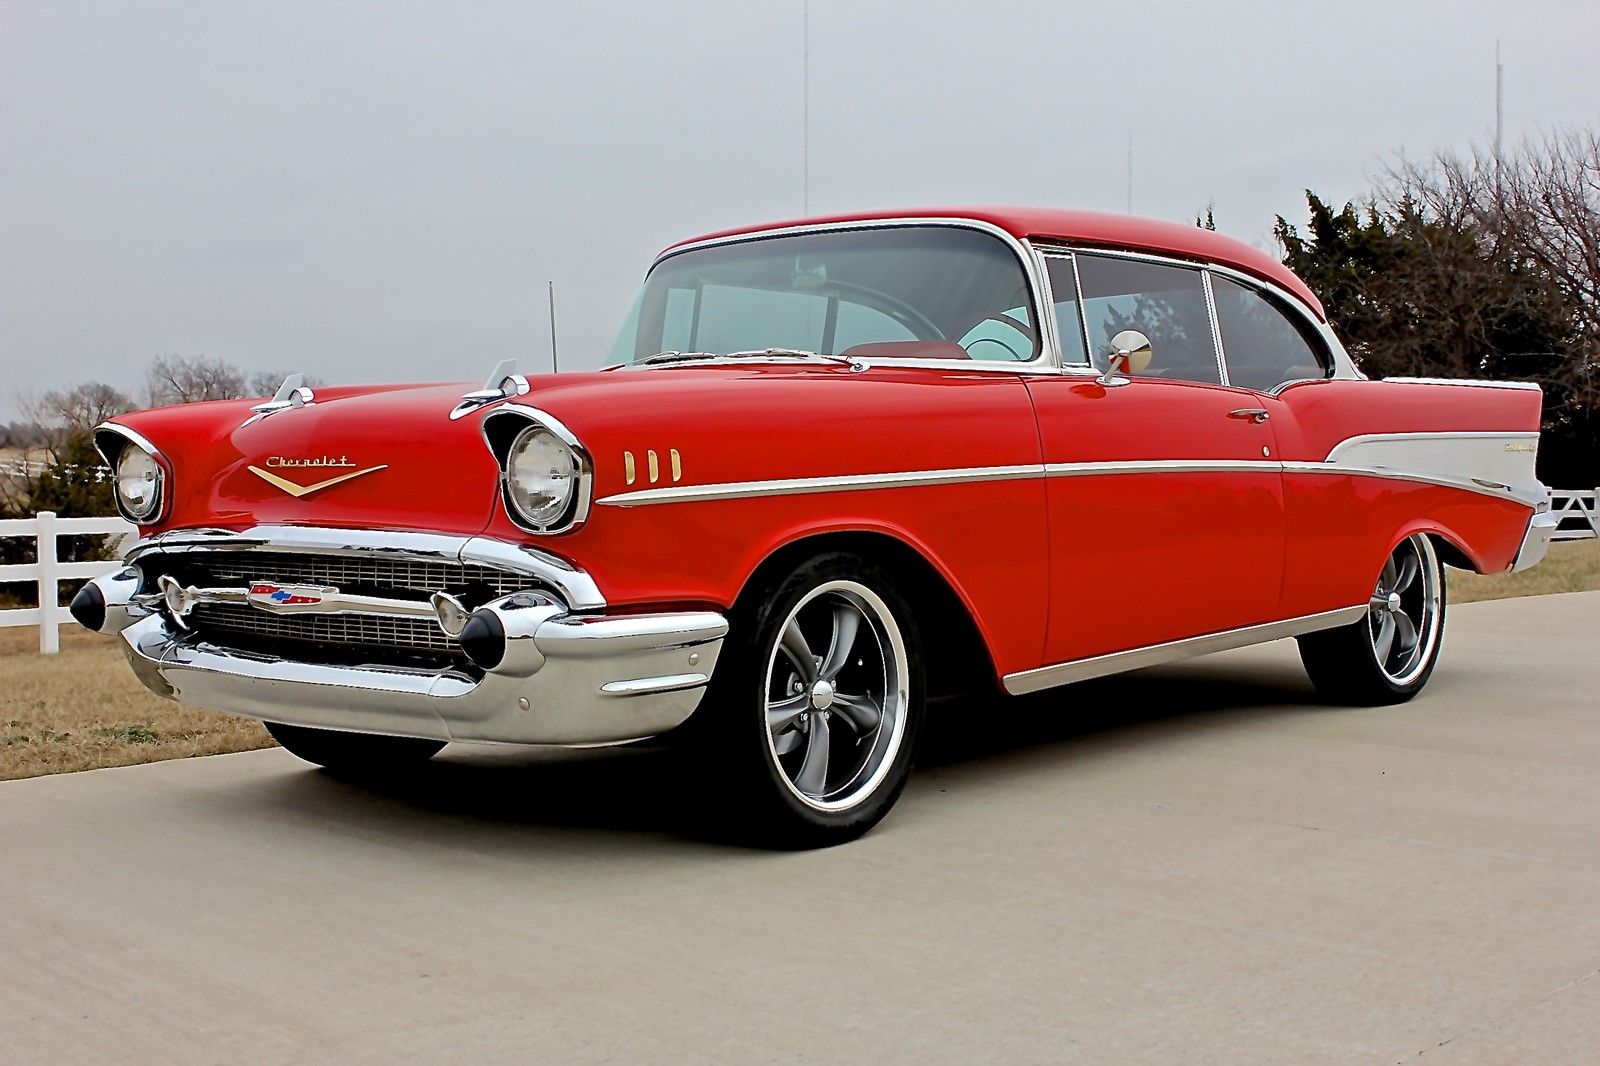 57 Chevy Belair Hardtop So Fine 57 Chevy Bel Air Classic Cars | Images ...